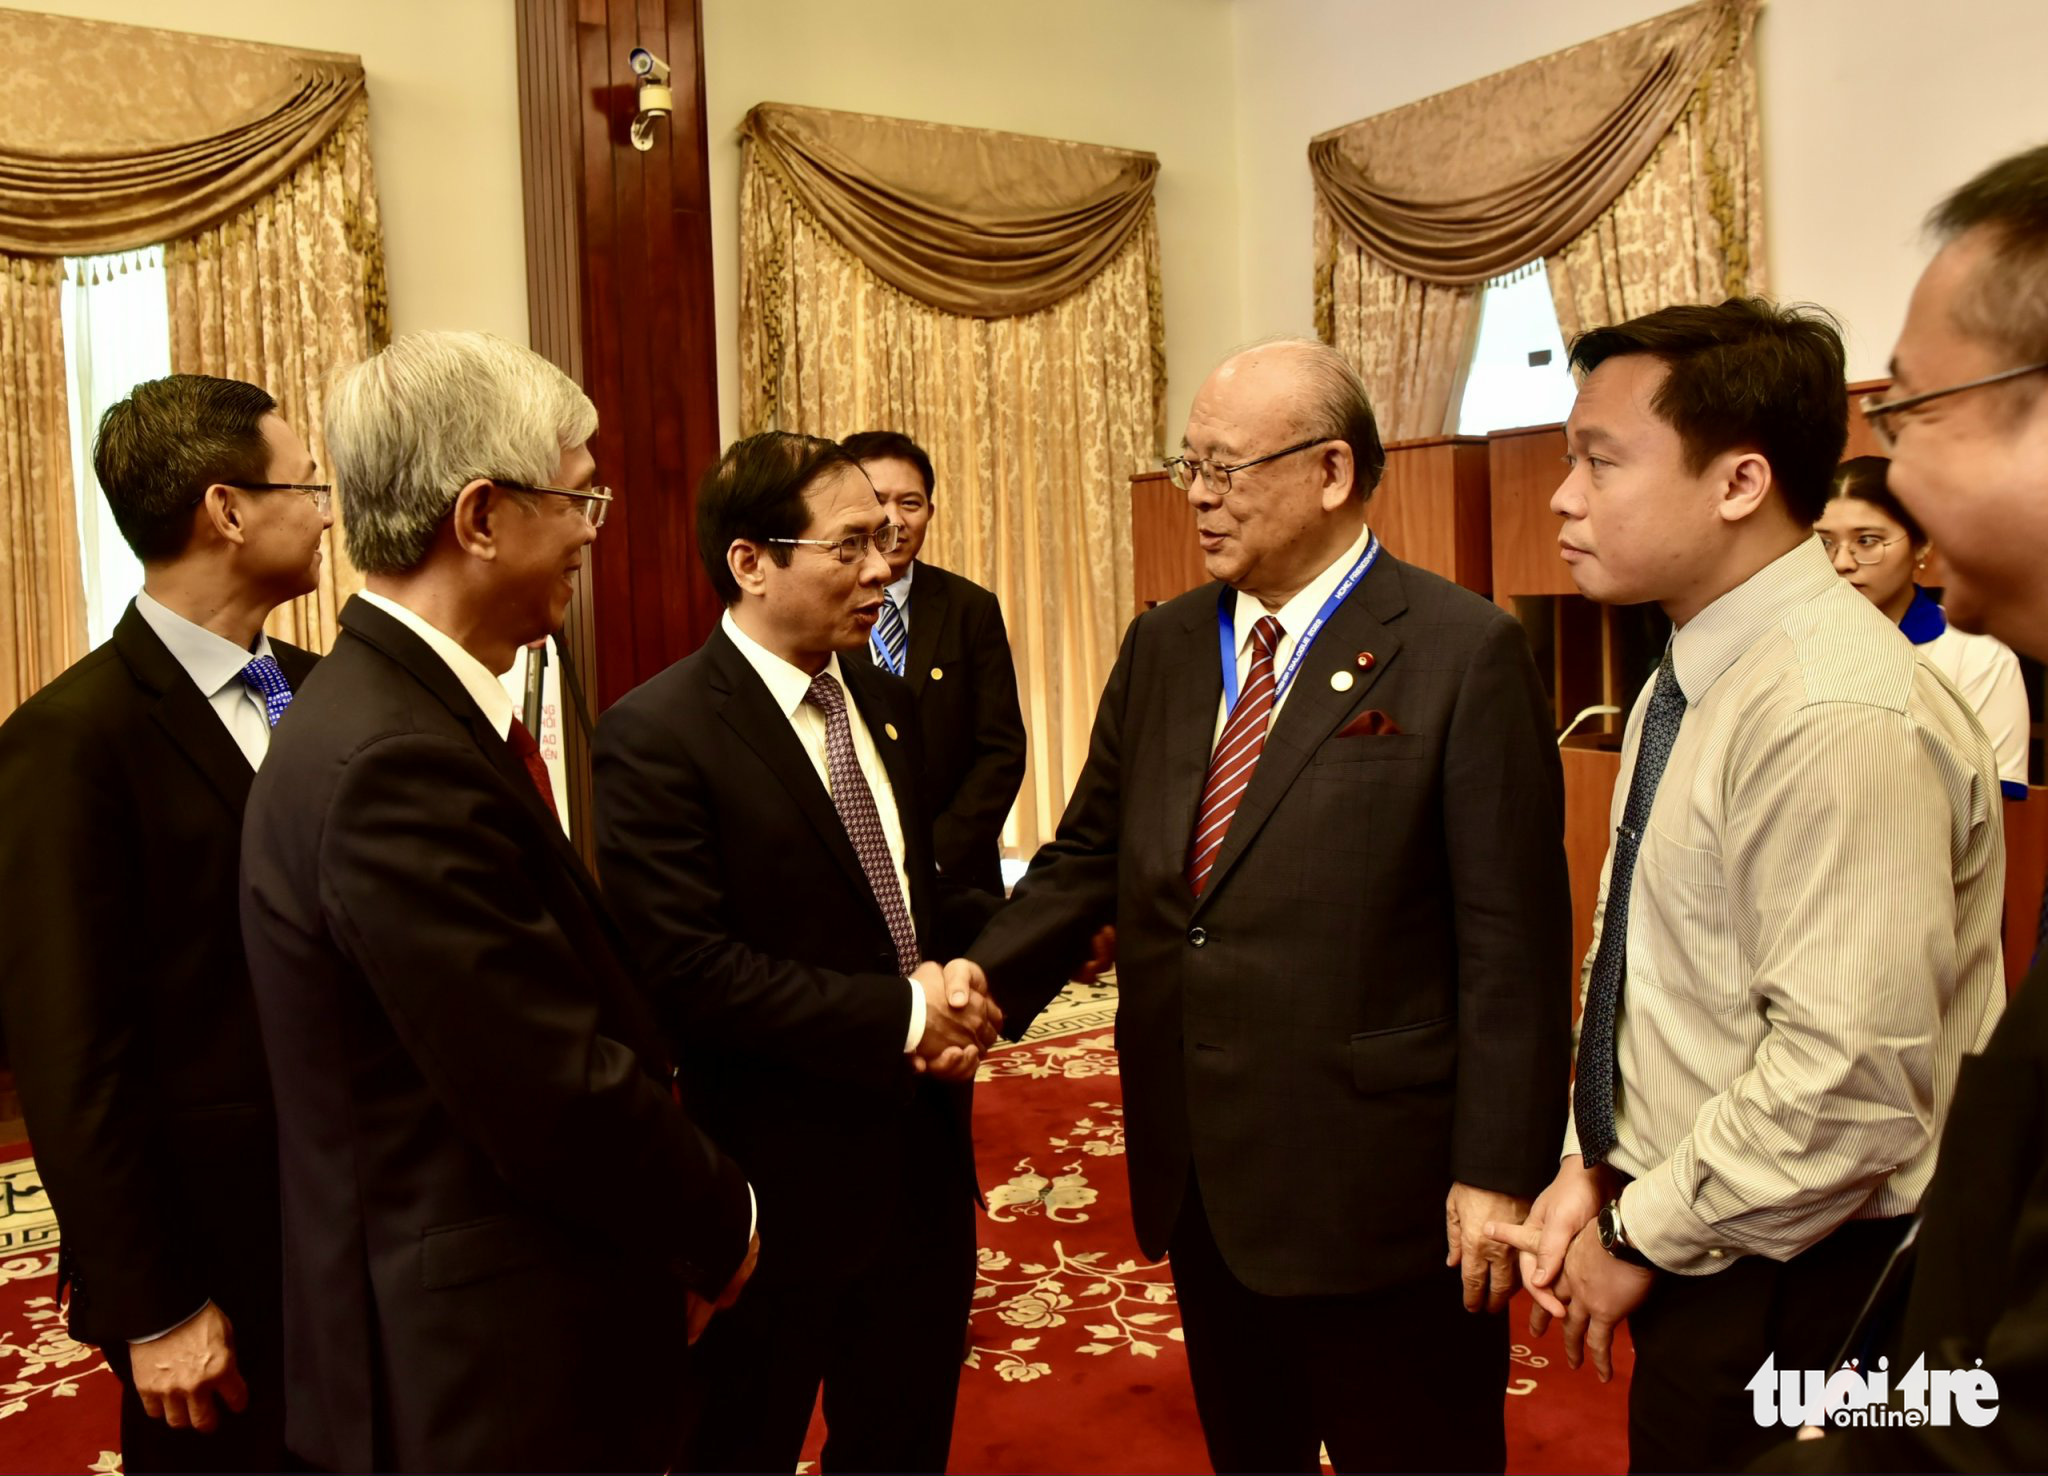 Vietnamese Minister of Foreign Affairs Bui Thanh Son (L, 3rd) meets delegates during the Ho Chi Minh City Friendship Dialogue, December 3, 2022. Photo: T.T.D. / Tuoi Tre